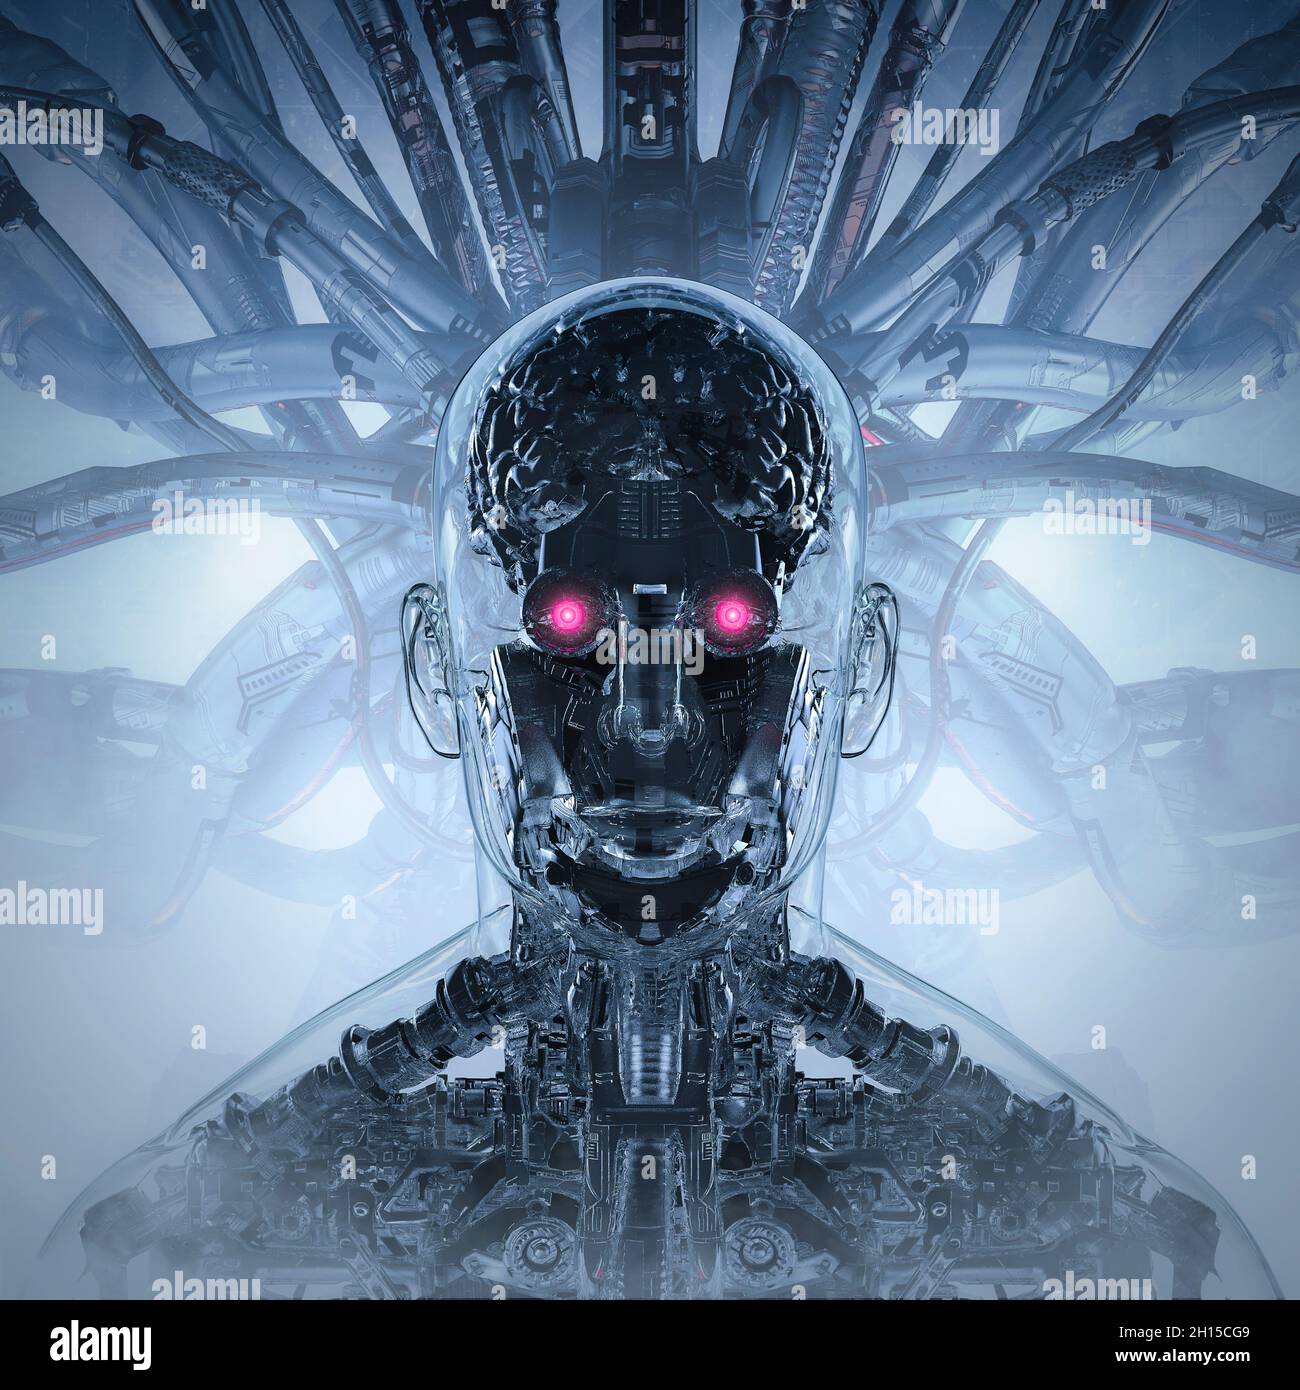 The machine in human form - 3D illustration of futuristic glass science fiction male humanoid cyborg composed of complex machinery Stock Photo